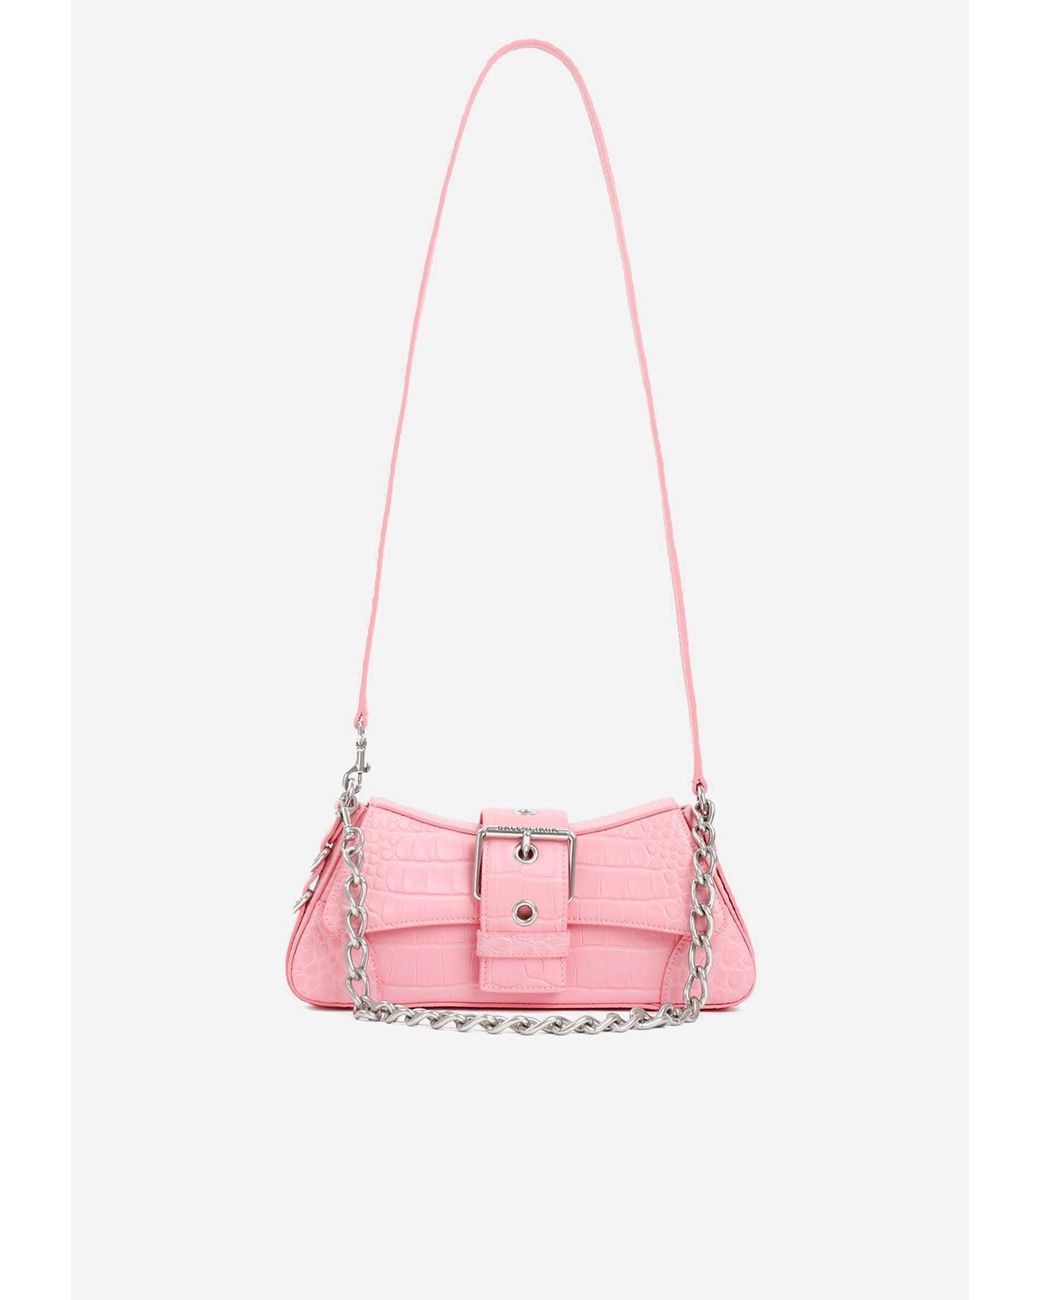 Balenciaga Lindsay Bag In Croc Embossed Leather in Pink | Lyst UK